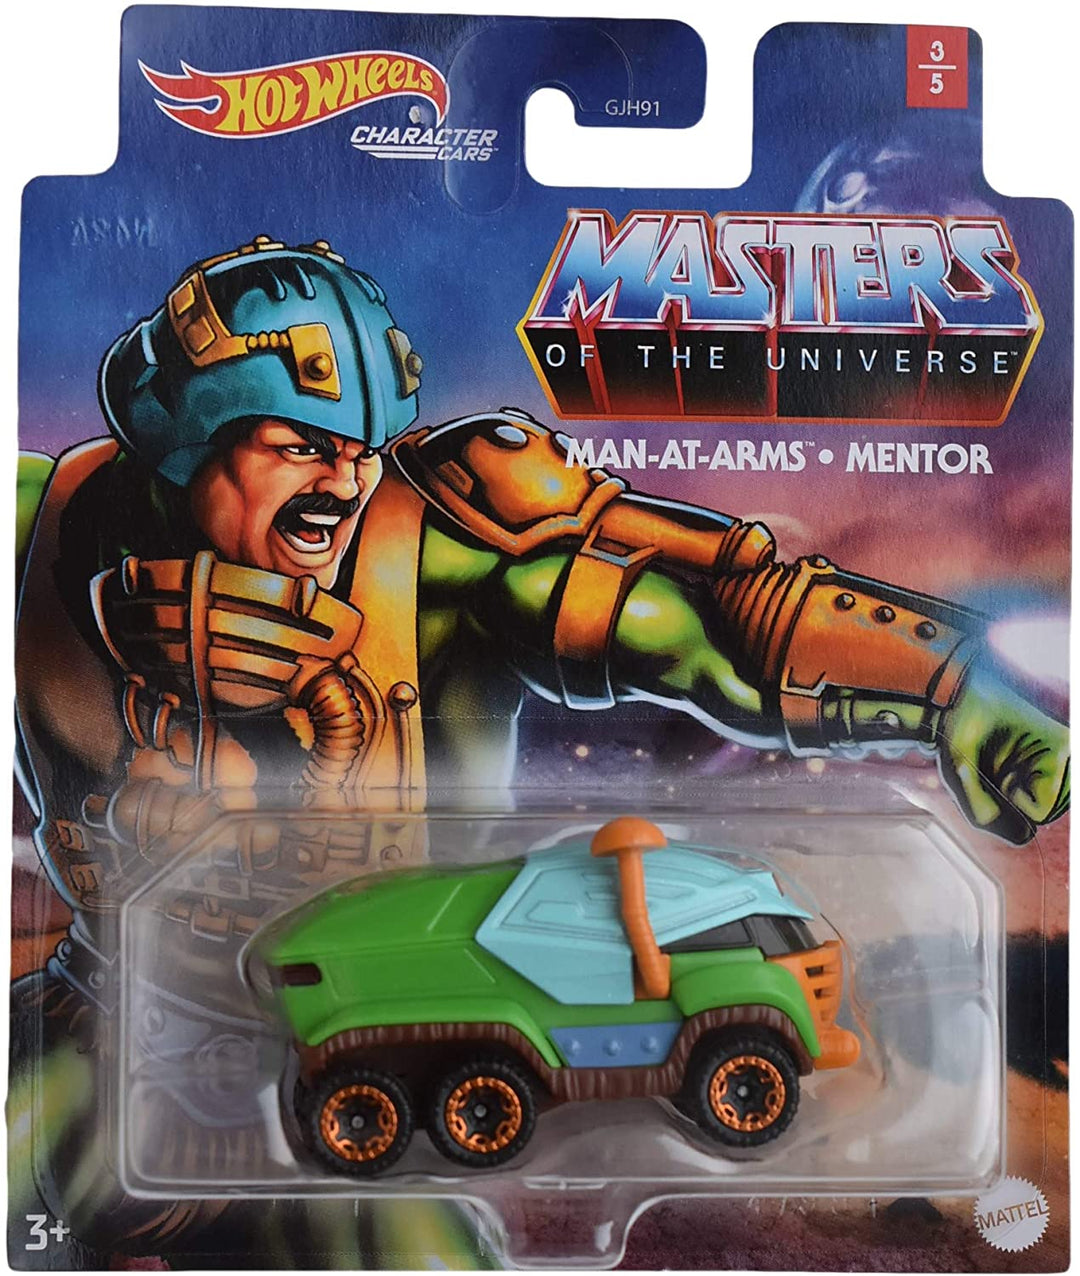 Character Cars Hot Wheels Masters of The Universe - Auto Fahrzeug - Man at Arms Mentor - Modellautos im Maßstab 1:64